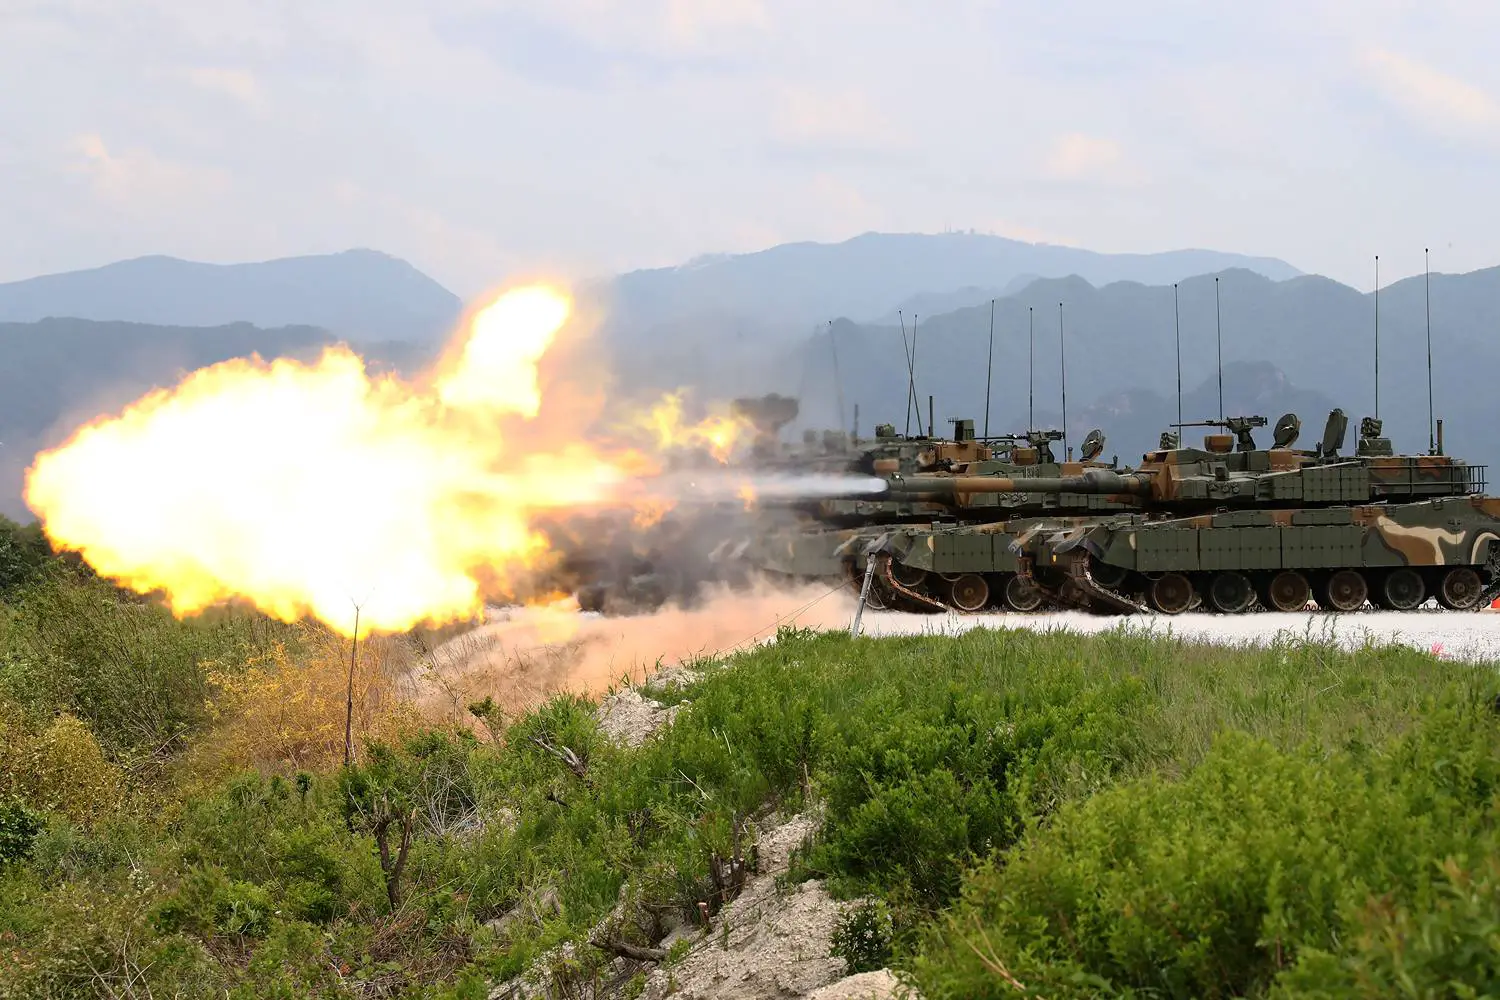 The U.S. holds the largest ever live-fire drills with South Korea